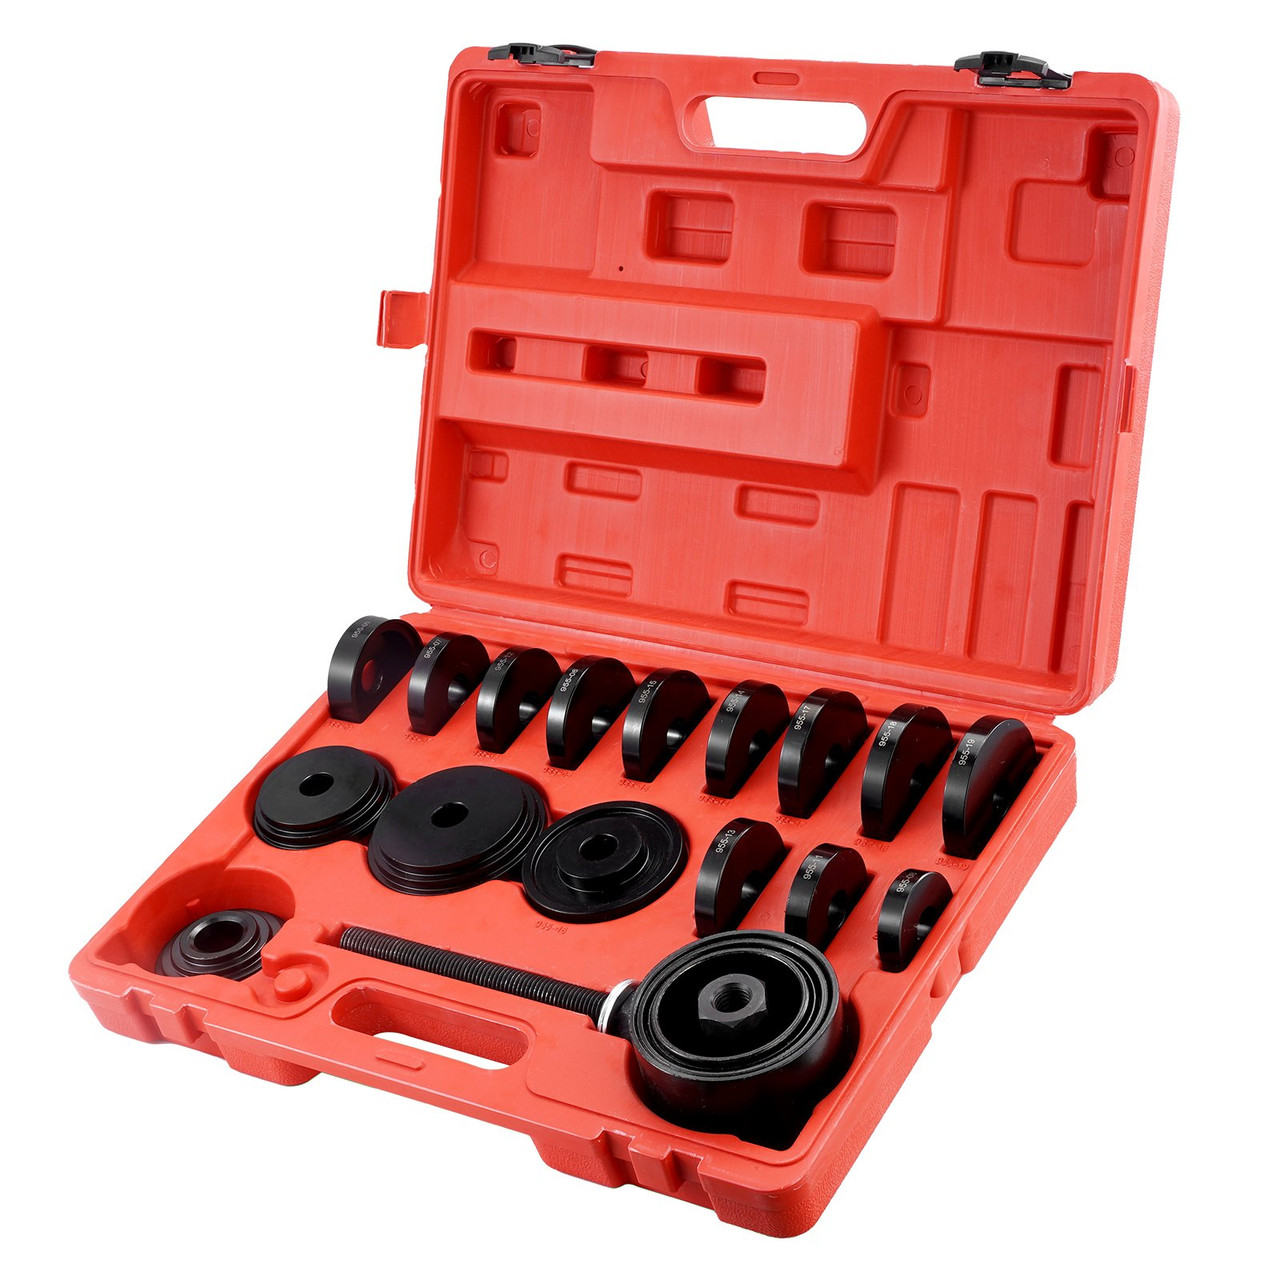 VEVOR Wheel Bearing Press Kit, 23 pcs FWD Bearing Puller Tools, for Front Wheel Drive Bearing Removal and Installation, Wheel Bearing Tool with Sliding Screws, Bushings, Sleeve Plates, Storage Case